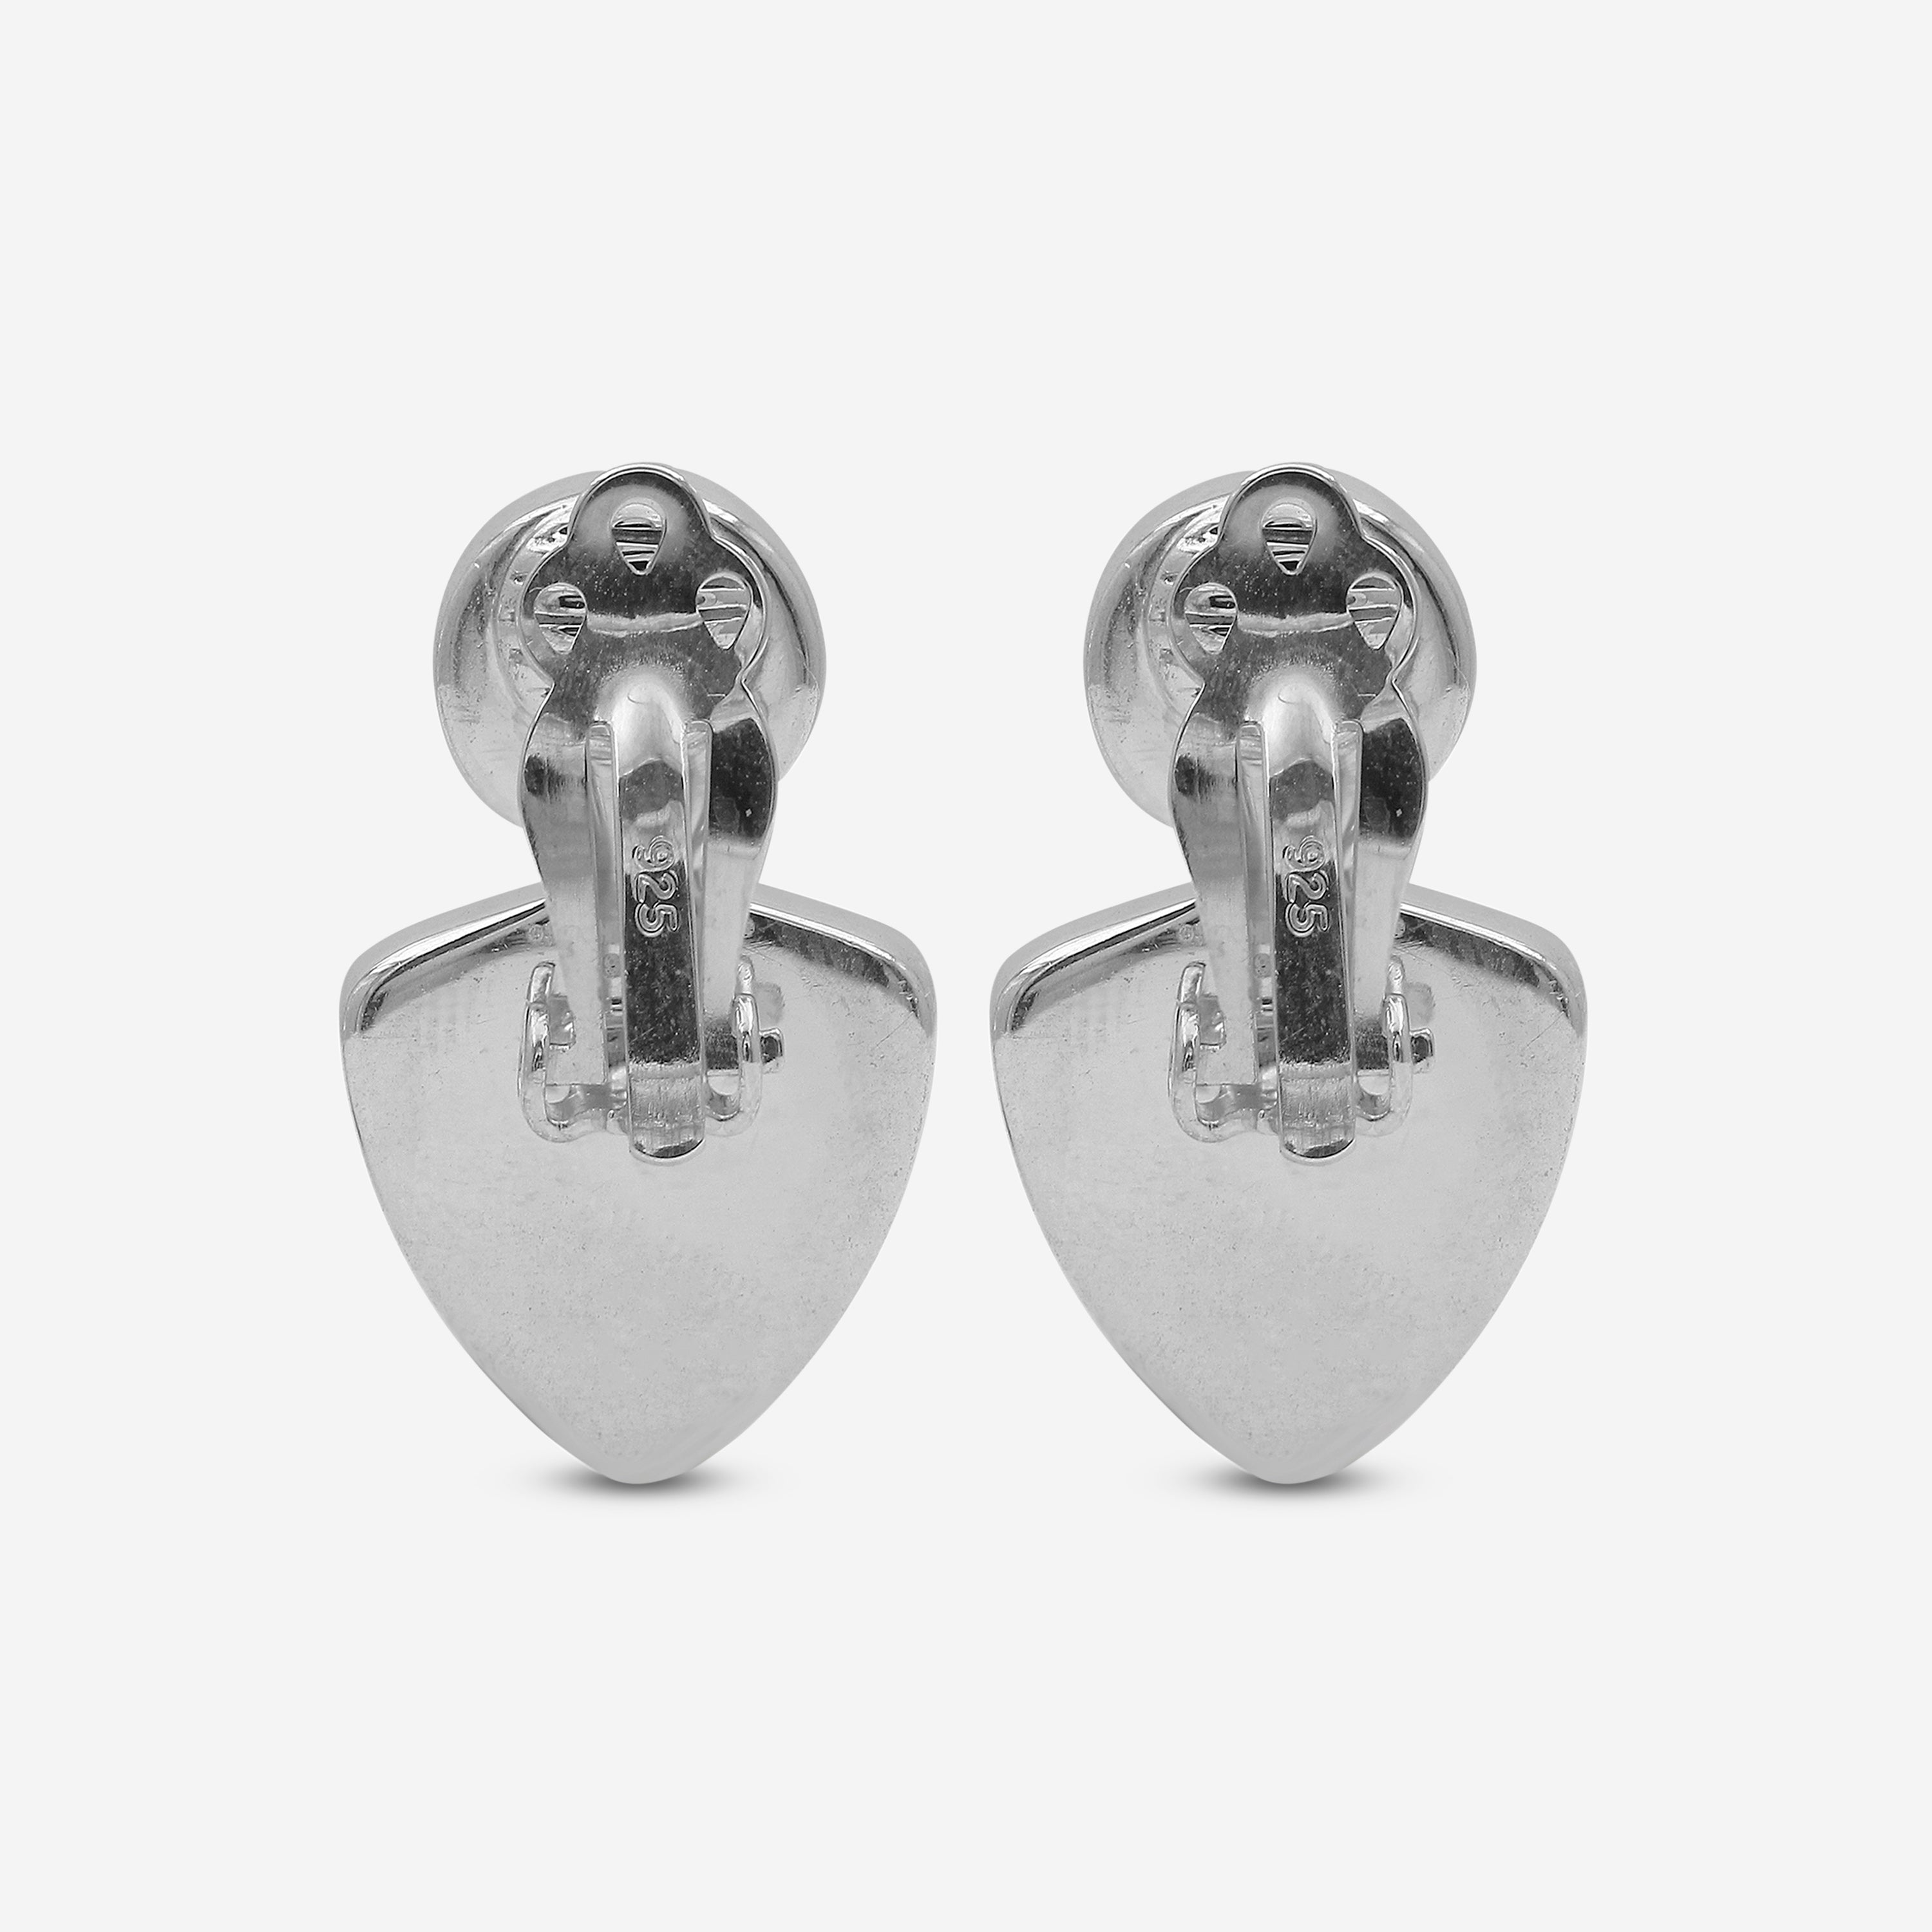 Stephen Dweck Sterling Silver White Pearl Hand Carved Natural Quartz and Mother of Pearl Clip Earrings SDE-32012